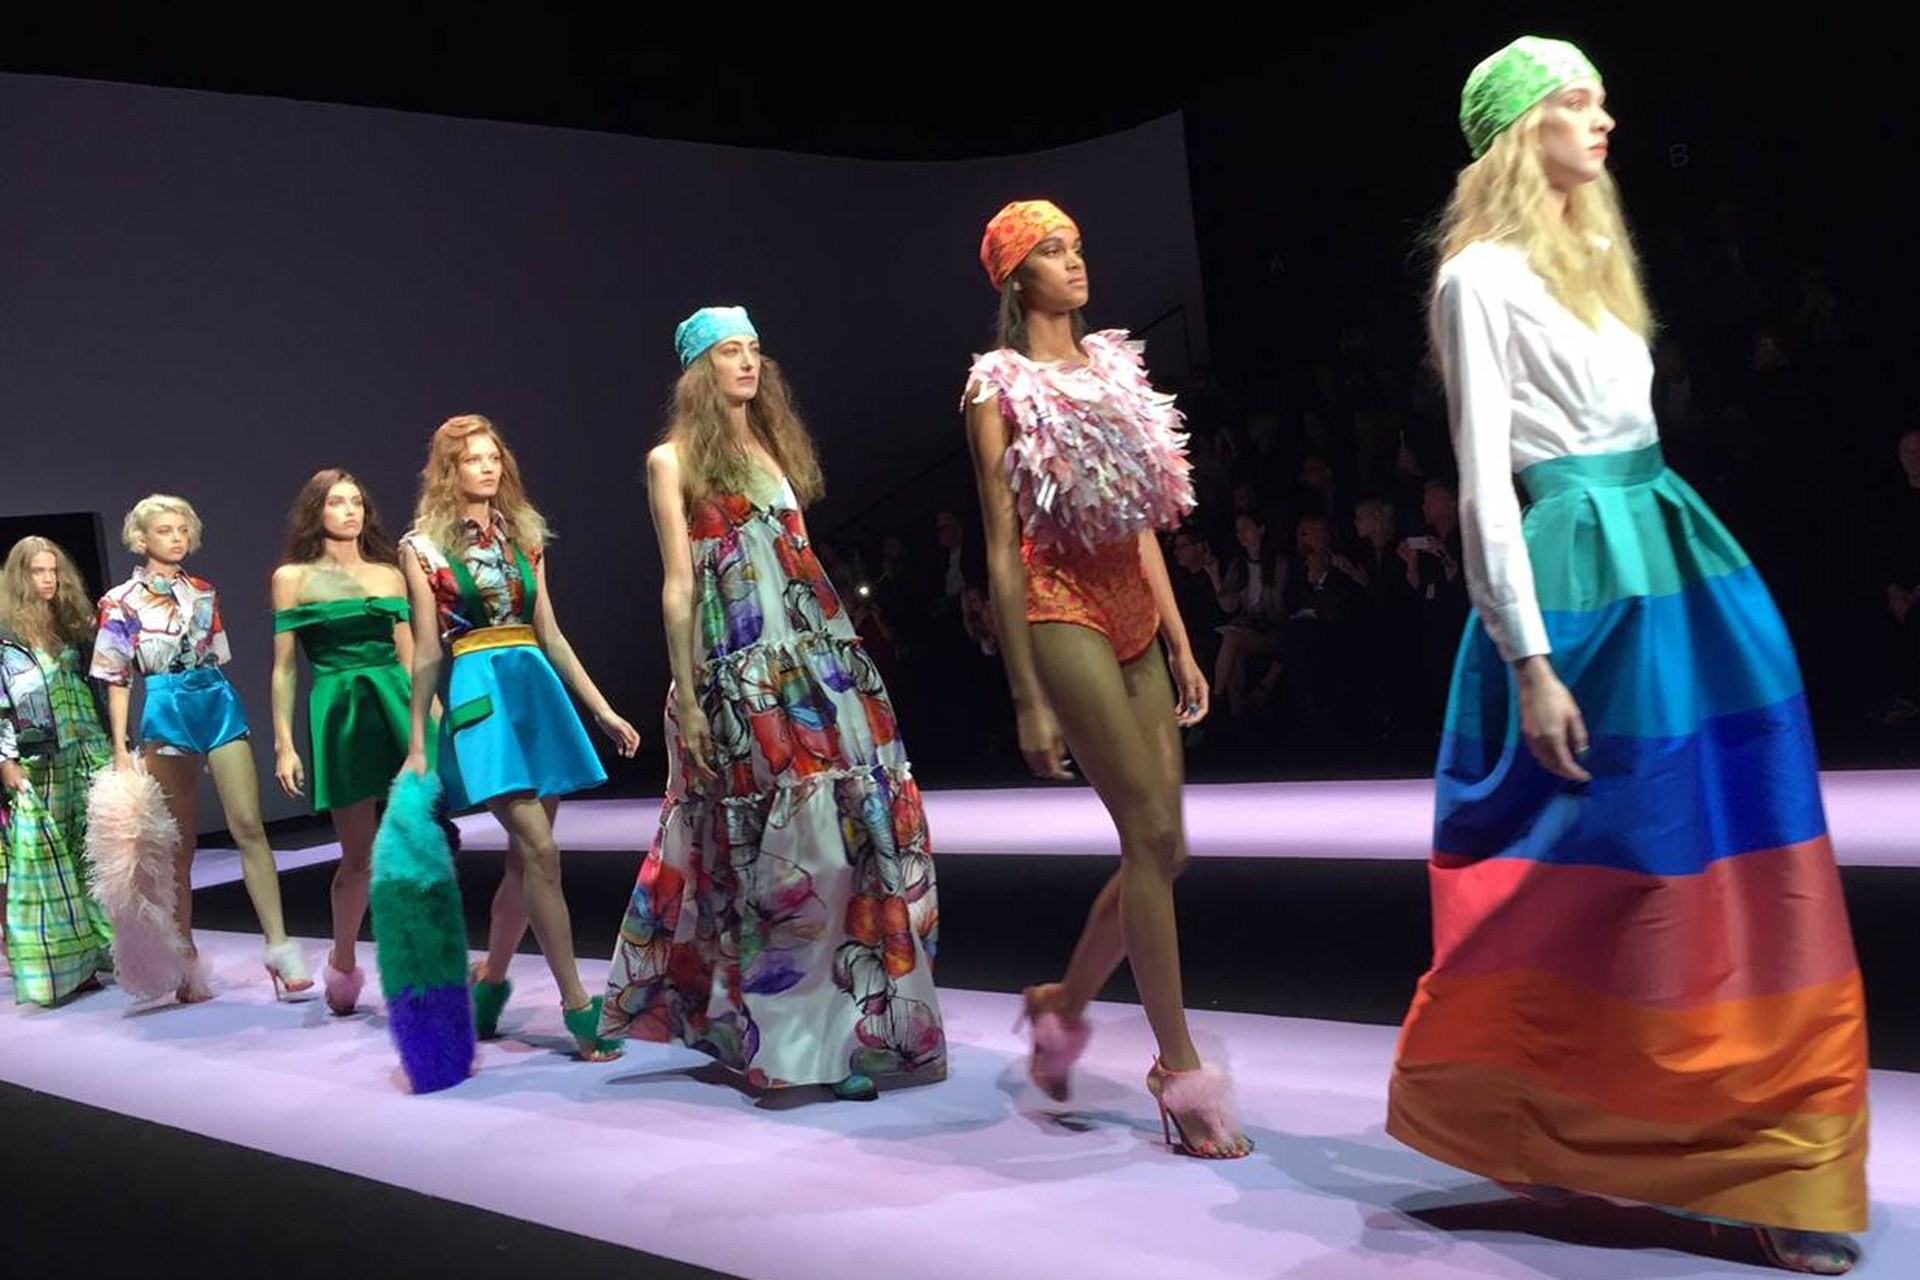 THE FINALE AT DAIZY SHELY'S SHOW FOR S/S 2016 (Foto: Suzy Menkes Instagram)